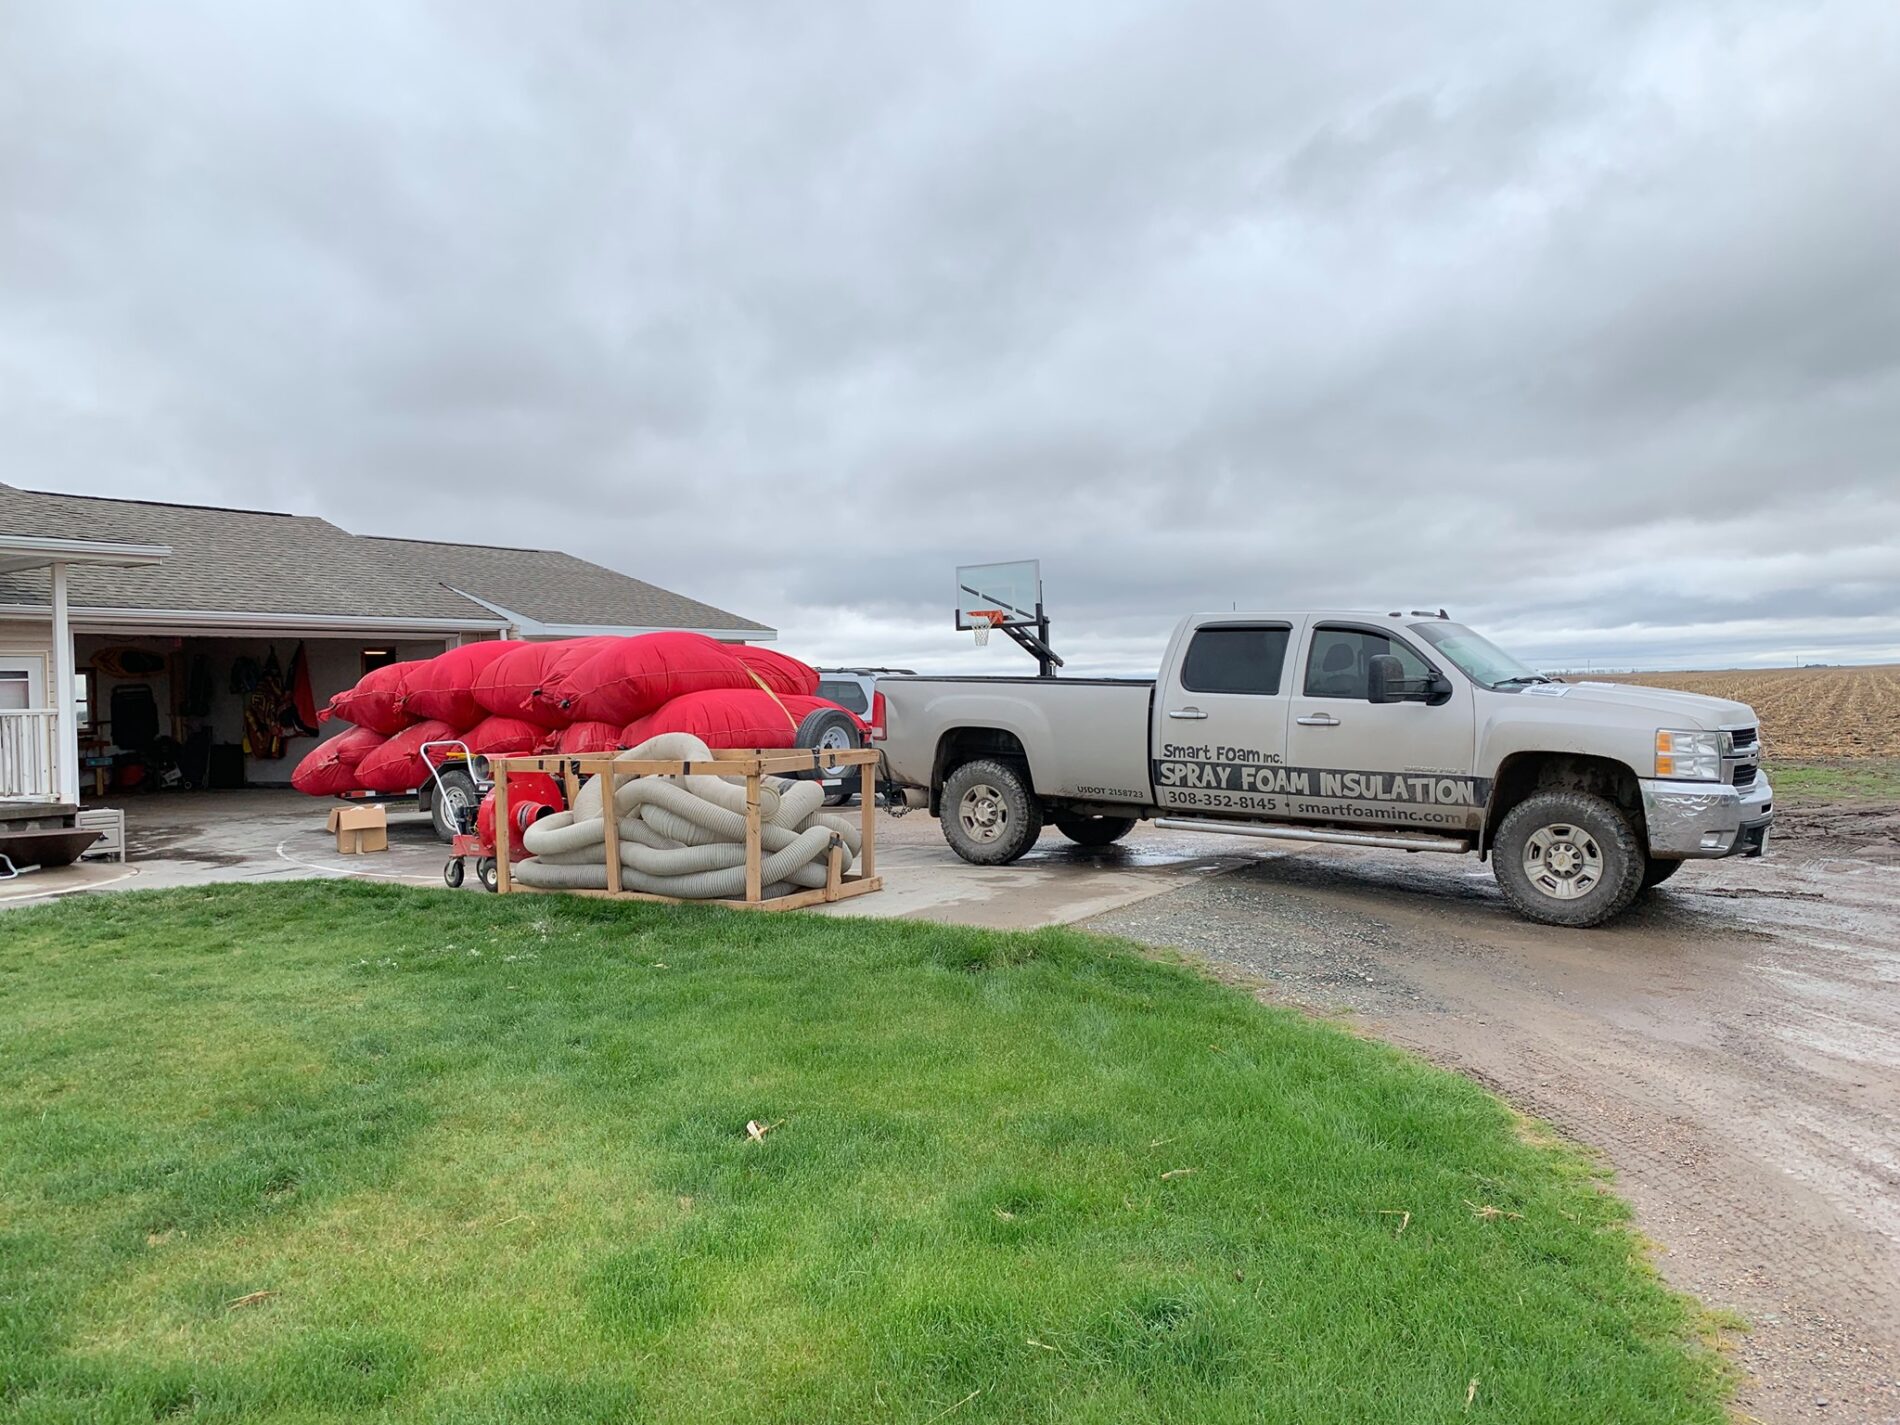 A truck labeled "Spray Foam Insulation" is parked in front of a house. Red tarps and coiled hoses are placed on the driveway. A person is seen handling equipment near the open garage.